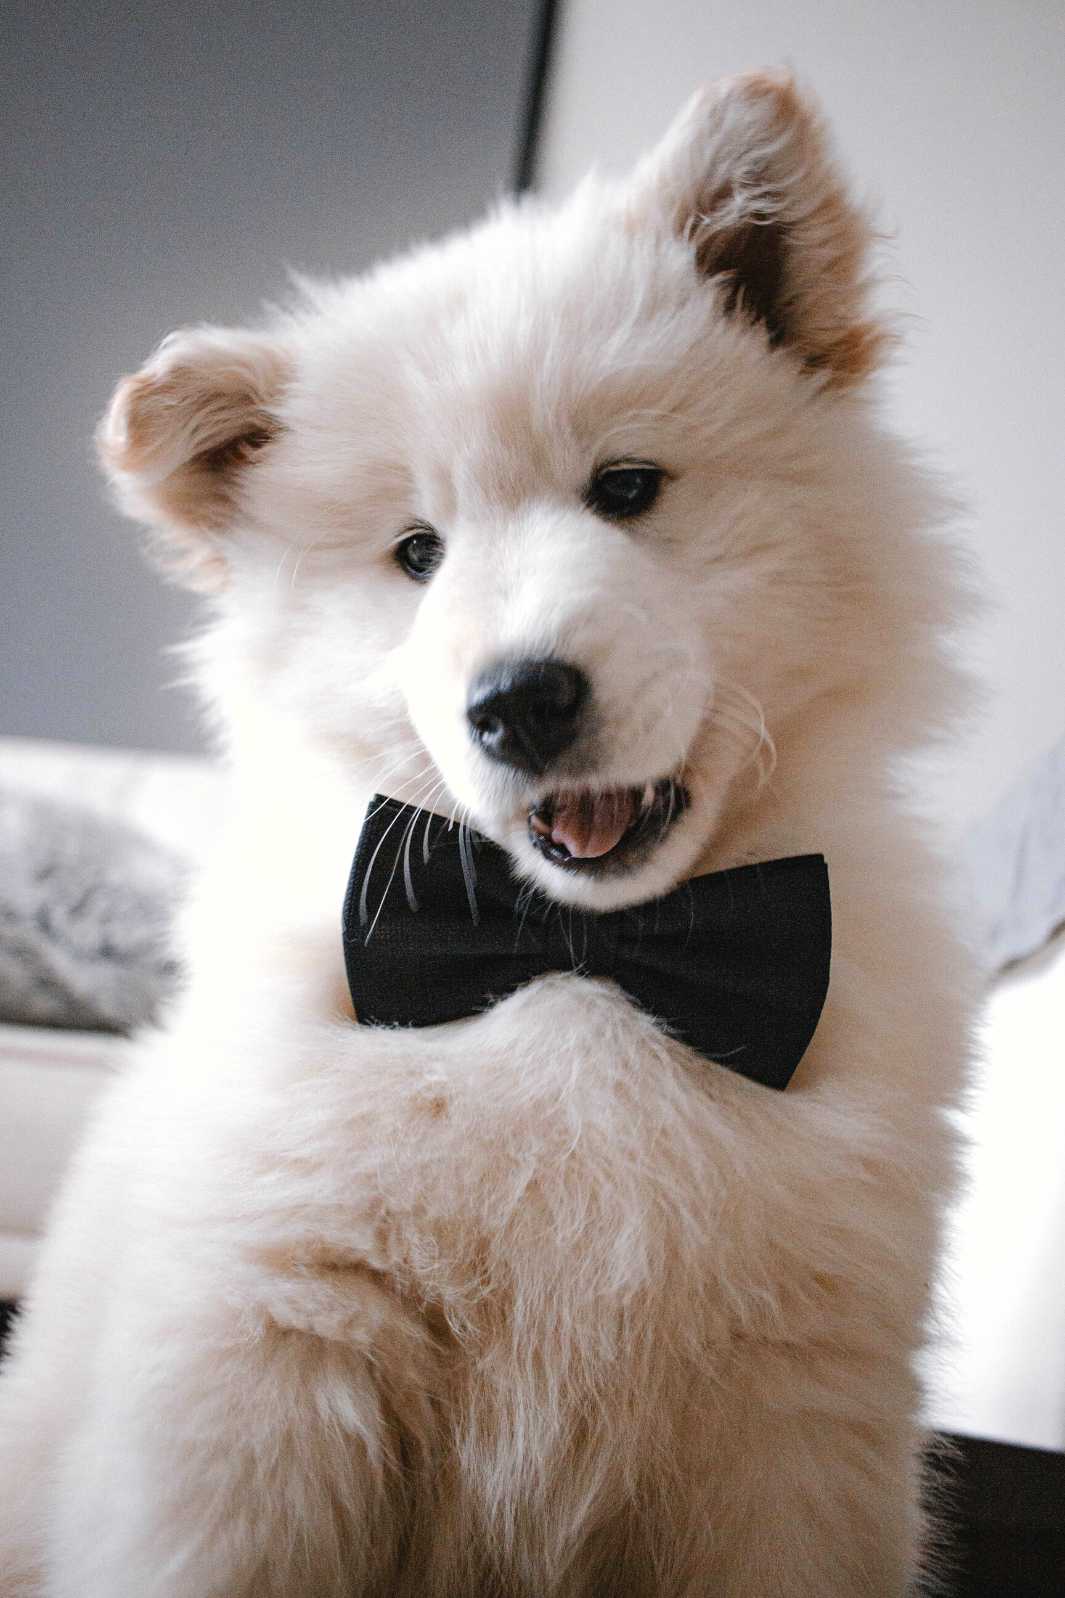 Adorable Samyoed wearing a bow tie, one of the Top 6 Most Expensive Dog Breeds in 2022.